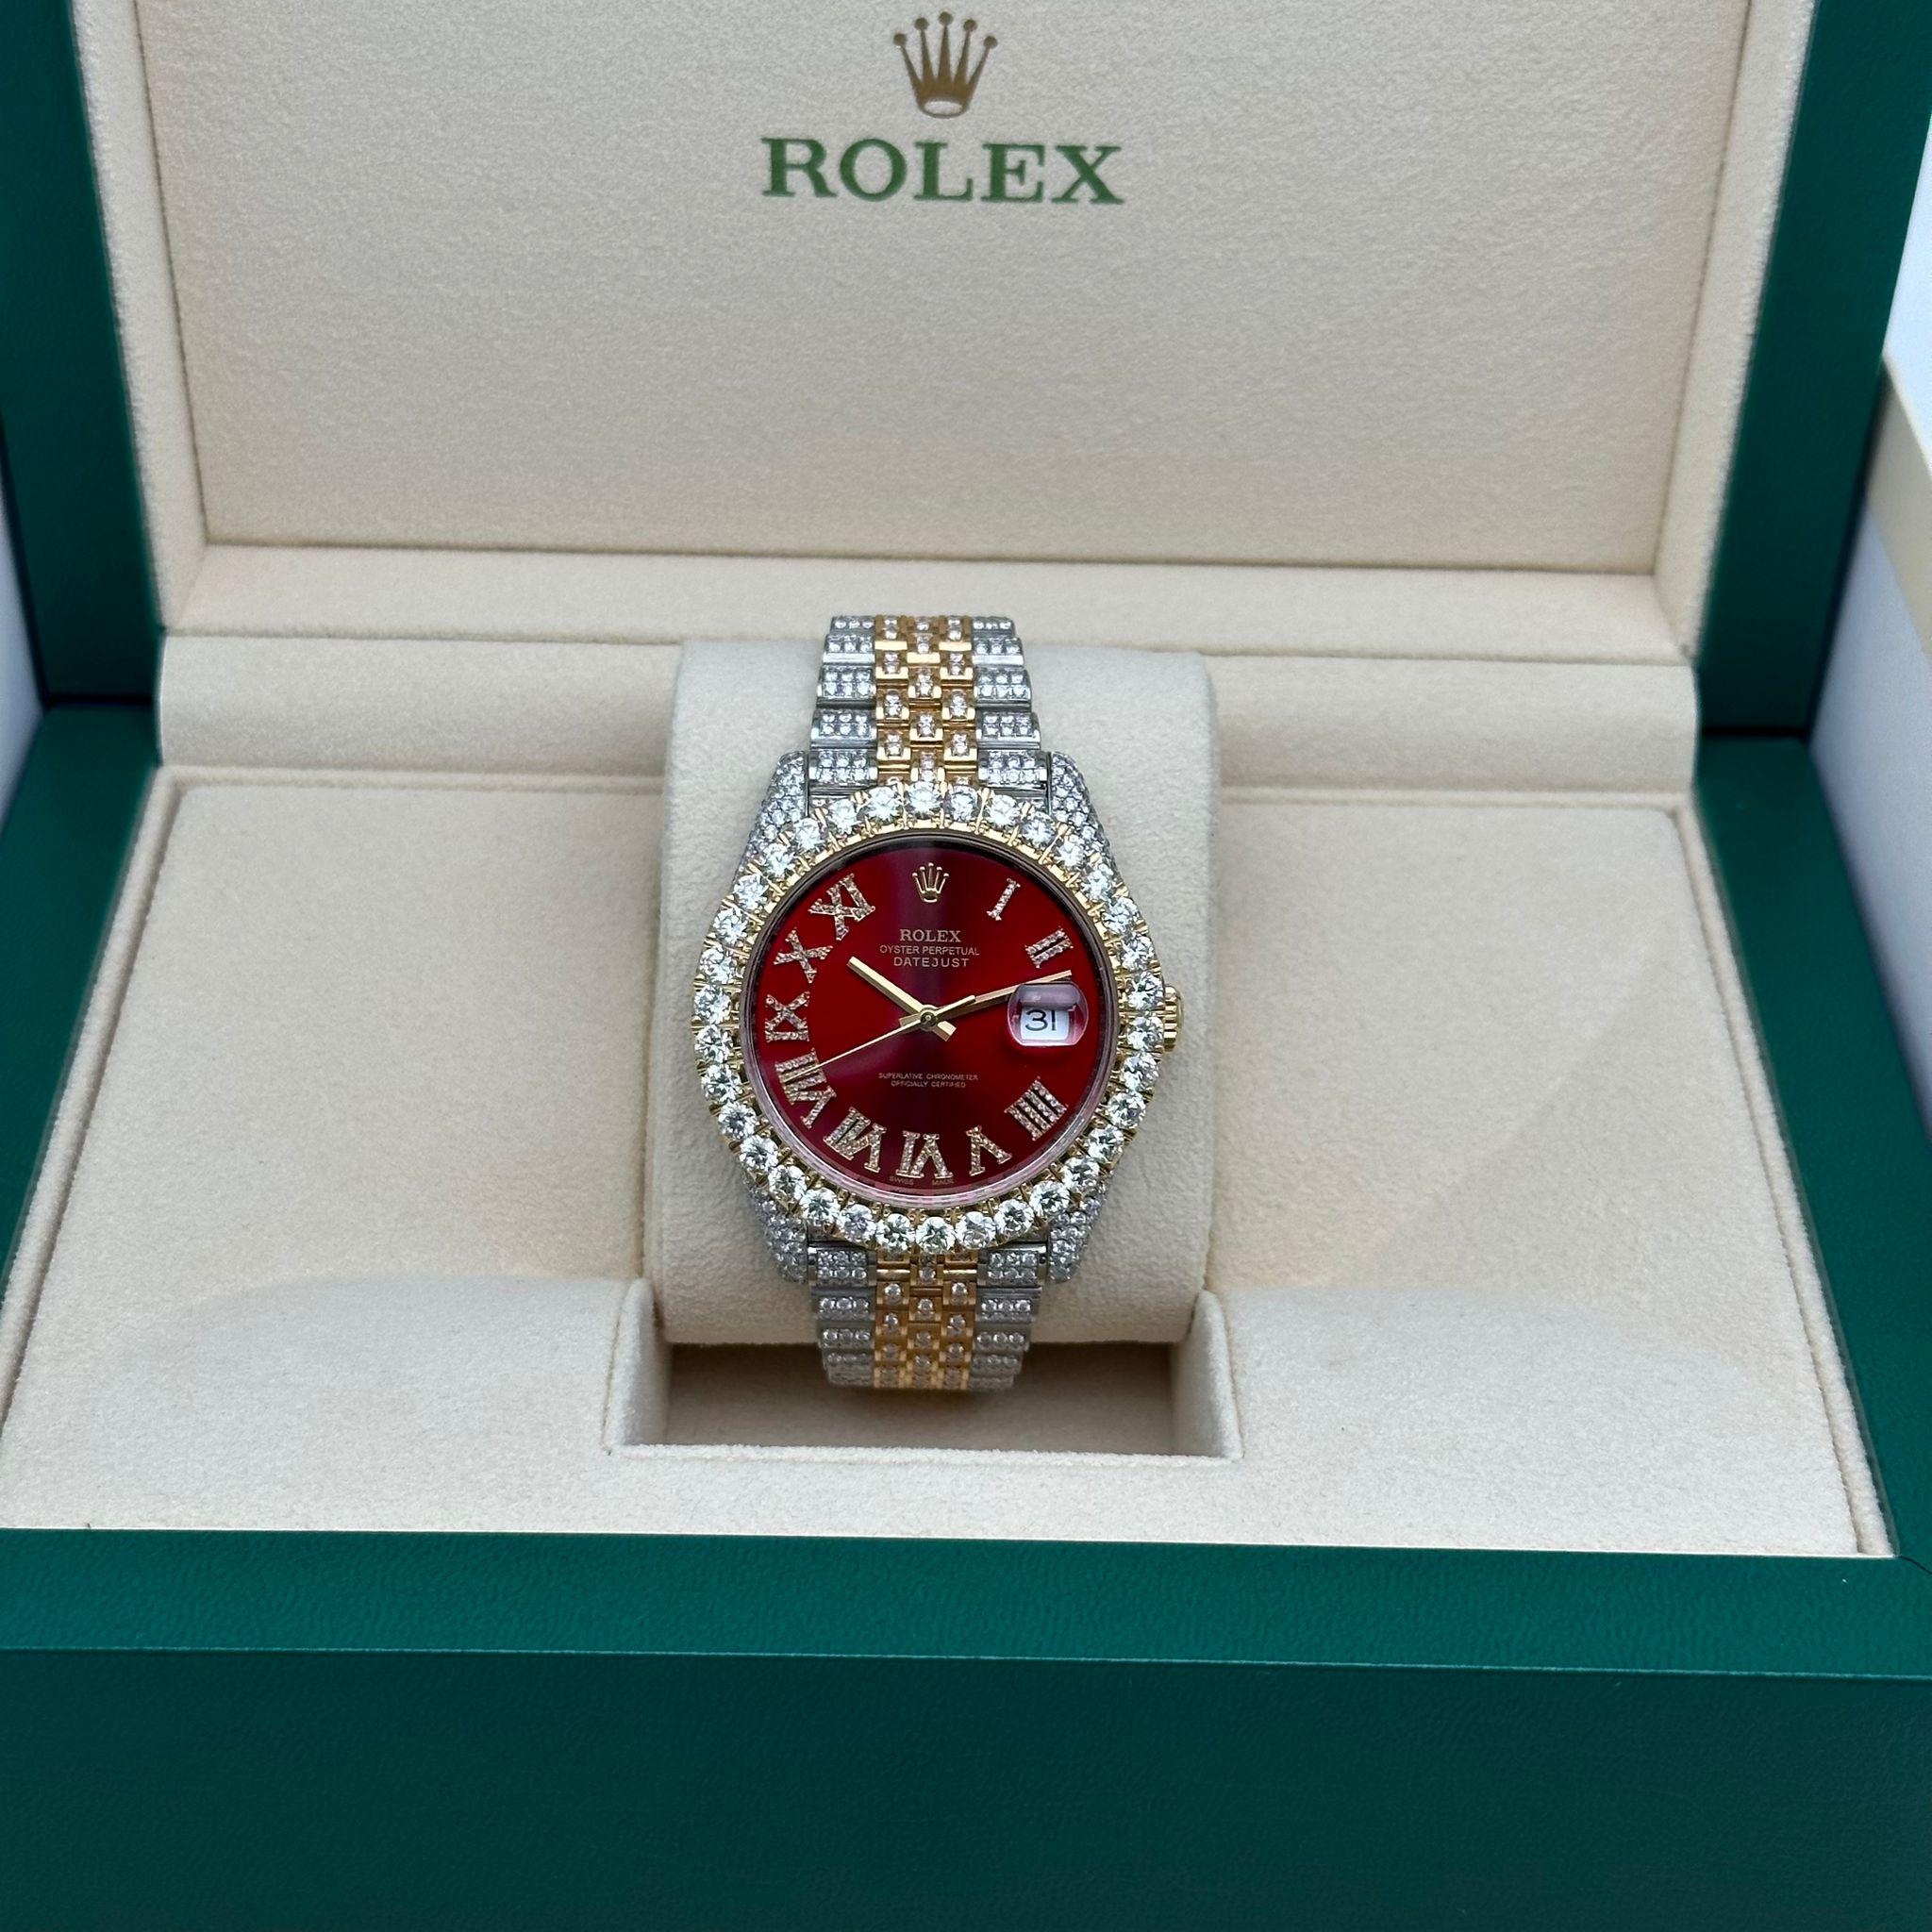 Custom diamonds totaling approximately 14.38cttw Color: G-H Clarity: VS-SI. Comes with a Rolex box and a 2017 card. 

* Free Shipping within the USA
* Three-year warranty coverage
* Kindly be aware that international buyers must cover any customs